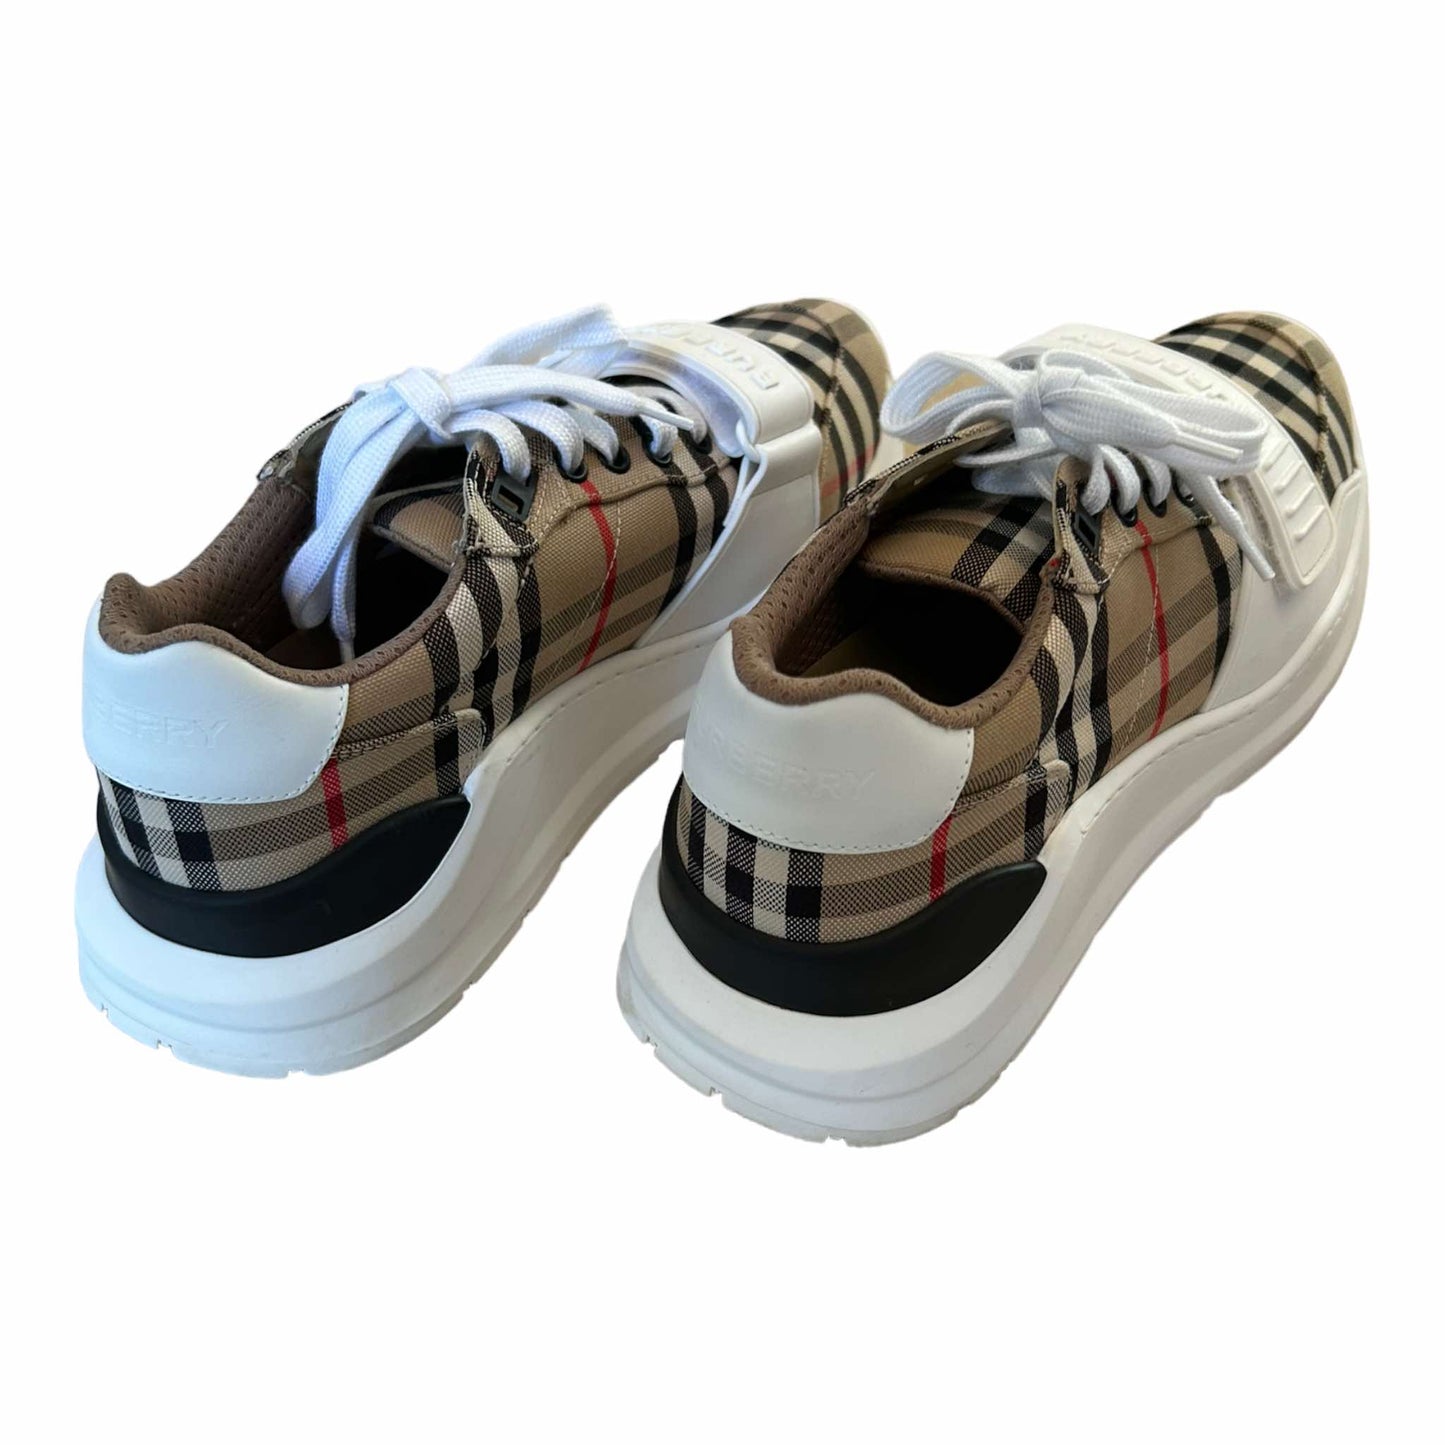 Burberry Check & Leather Sneakers - 40EU